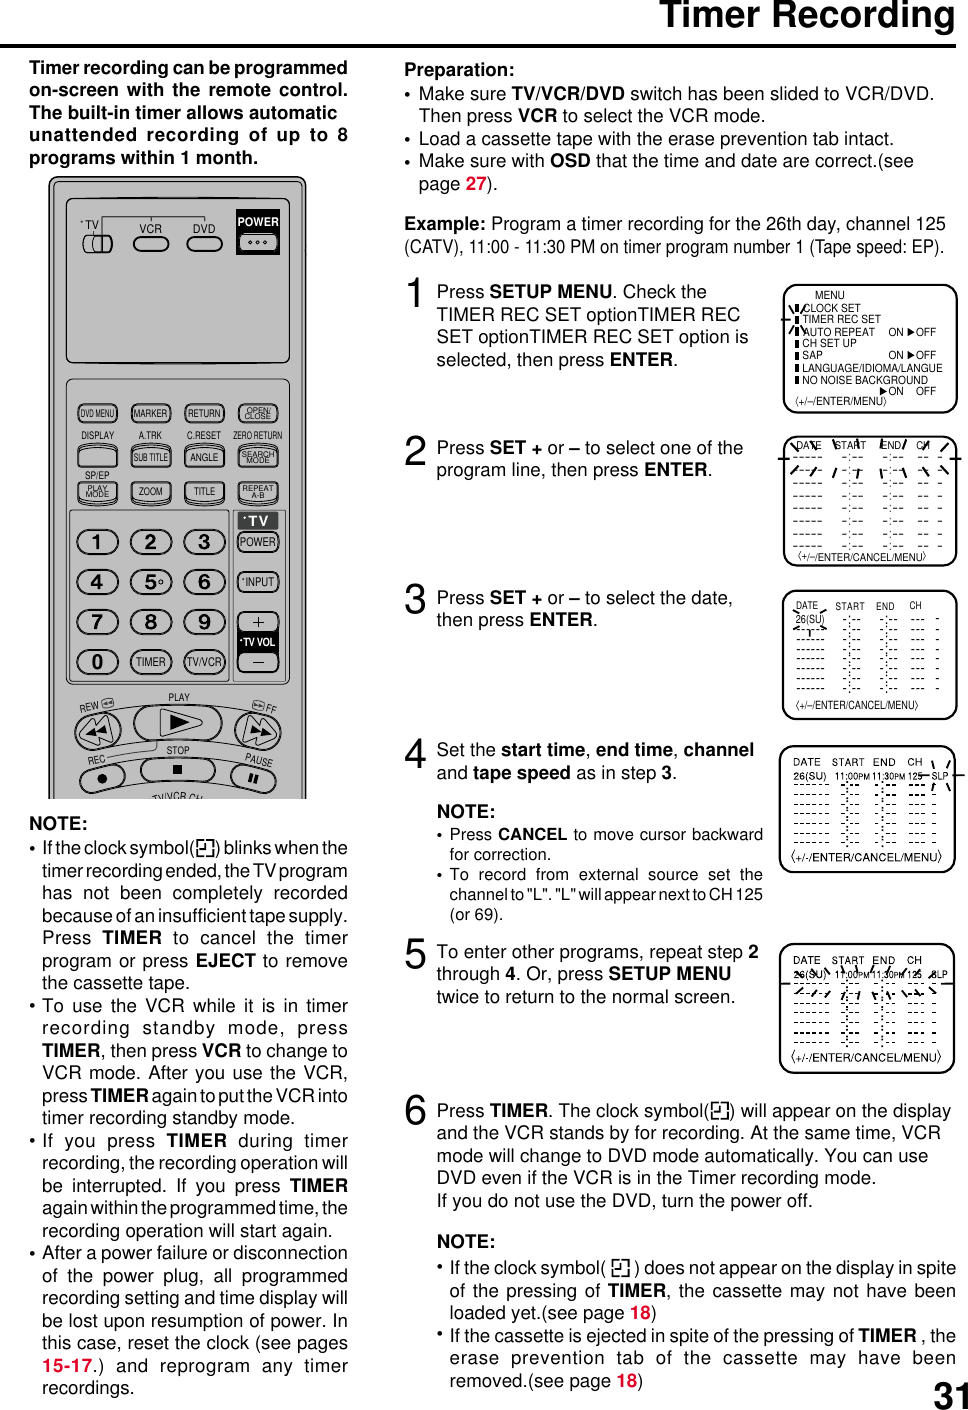 313Timer RecordingPress SETUP MENU. Check theTIMER REC SET optionTIMER RECSET optionTIMER REC SET option isselected, then press ENTER.Press SET + or – to select the date,then press ENTER.12Press SET + or – to select one of theprogram line, then press ENTER.4Make sure TV/VCR/DVD switch has been slided to VCR/DVD.Then press VCR to select the VCR mode.Load a cassette tape with the erase prevention tab intact.Make sure with OSD that the time and date are correct.(seepage 27).Preparation:•••Timer recording can be programmedon-screen with the remote control.The built-in timer allows automaticunattended recording of up to 8programs within 1 month.Set the start time, end time, channeland tape speed as in step 3.Example: Program a timer recording for the 26th day, channel 125(CATV), 11:00 - 11:30 PM on timer program number 1 (Tape speed: EP).⟨+/–/ENTER/MENU⟩MENUCLOCK SETTIMER REC SET ON OFFON OFFON OFFAUTO REPEATCH SET UPSAPLANGUAGE/IDIOMA/LANGUE NO NOISE BACKGROUND⟨+/–/ENTER/CANCEL/MENU⟩DATE START END CH––––– –:–– –:–– –– –––––– –:–– –:–– –– –––––– –:–– –:–– –– –––––– –:–– –:–– –– –––––– –:–– –:–– –– –––––– –:–– –:–– –– –––––– –:–– –:–– –– –––––– –:–– –:–– –– –-:---:---:---:---:---:-- ----:-- -:-- ----:-- ----:-- -------:-- -:-- ----:-- -:-- ----:-- --------- ------- ------- -------- ------- ------- ------- - 26(SU)⟨+/–/ENTER/CANCEL/MENU⟩START ENDDATE CH-:--NOTE:Press CANCEL to move cursor backwardfor correction.To record from external source set thechannel to &quot;L&quot;. &quot;L&quot; will appear next to CH 125(or 69).••5To enter other programs, repeat step 2through 4. Or, press SETUP MENUtwice to return to the normal screen.6Press TIMER. The clock symbol( ) will appear on the displayand the VCR stands by for recording. At the same time, VCRmode will change to DVD mode automatically. You can useDVD even if the VCR is in the Timer recording mode.If you do not use the DVD, turn the power off.NOTE:If the clock symbol(   ) does not appear on the display in spiteof the pressing of TIMER, the cassette may not have beenloaded yet.(see page 18)If the cassette is ejected in spite of the pressing of TIMER , theerase prevention tab of the cassette may have beenremoved.(see page 18)••NOTE:If the clock symbol( ) blinks when thetimer recording ended, the TV programhas not been completely recordedbecause of an insufficient tape supply.Press  TIMER to cancel the timerprogram or press EJECT to removethe cassette tape.To use the VCR while it is in timerrecording standby mode, pressTIMER, then press VCR to change toVCR mode. After you use the VCR,press TIMER again to put the VCR intotimer recording standby mode.If you press TIMER during timerrecording, the recording operation willbe interrupted. If you press TIMERagain within the programmed time, therecording operation will start again.After a power failure or disconnectionof the power plug, all programmedrecording setting and time display willbe lost upon resumption of power. Inthis case, reset the clock (see pages15-17.) and reprogram any timerrecordings.••••TV/VCRCHTV VCR DVDPOWERDVD MENUMARKER RETURNOPEN/CLOSEDISPLAY A.TRK C.RESETZERO RETURNSUB TITLEANGLESEARCHMODESP/EPPLAYMODEZOOM TITLEREPEATA-BTVPOWERINPUTTV VOL0TIMER TV/VCRREWPLAYFFRECSTOPPAUSE